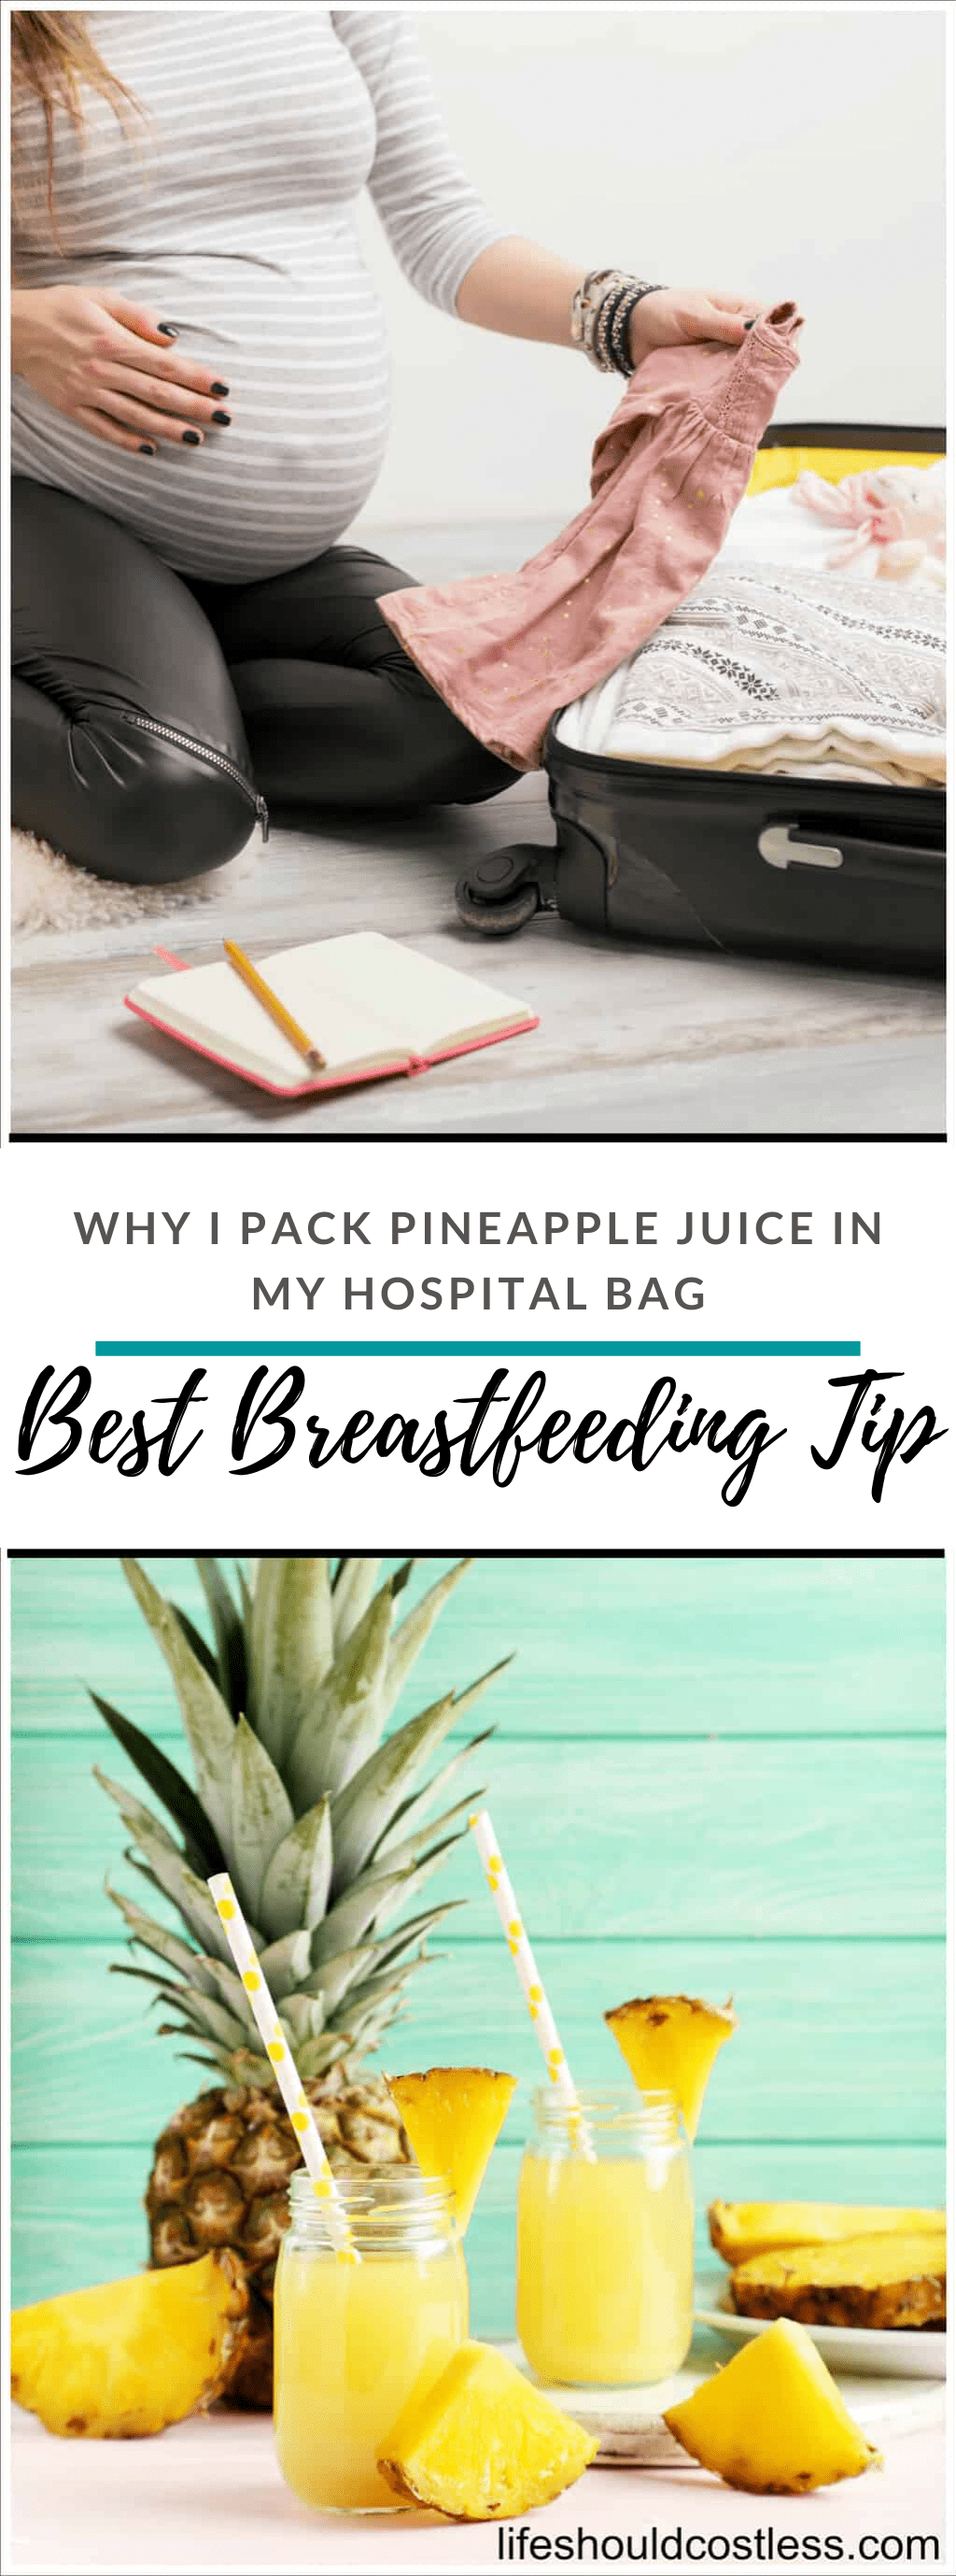 Pineapple juice after delivery, postpartum, best breast feeding tip. Why I pack pineapple juice in hospital bag. lifeshouldcostless.com